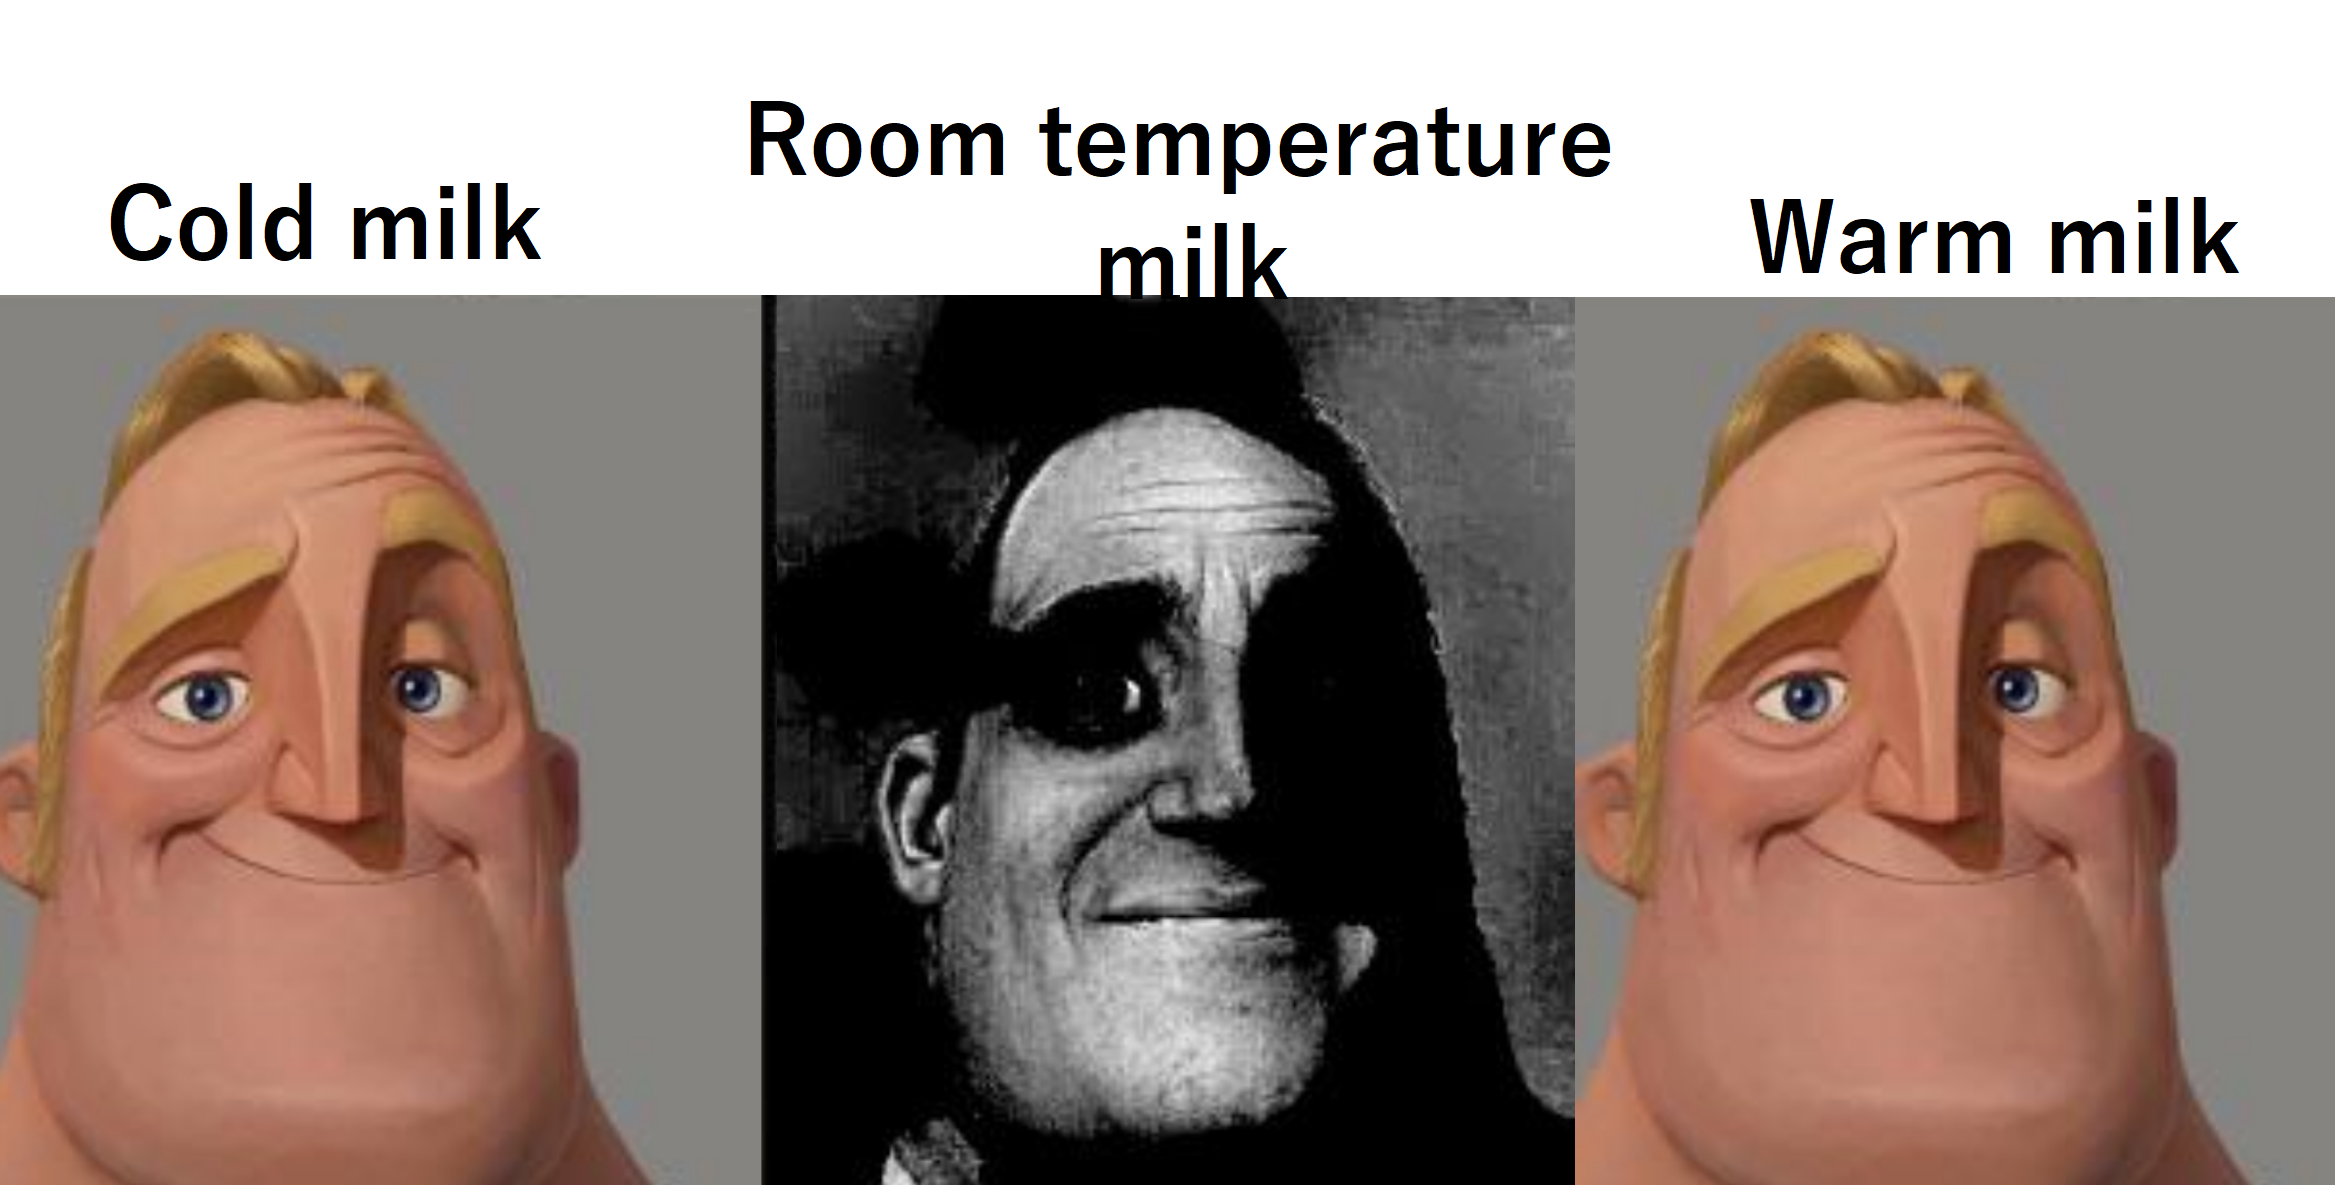 dank memes - funny memes - there is soft in the crunchy - Cold milk Room temperature milk Warm milk